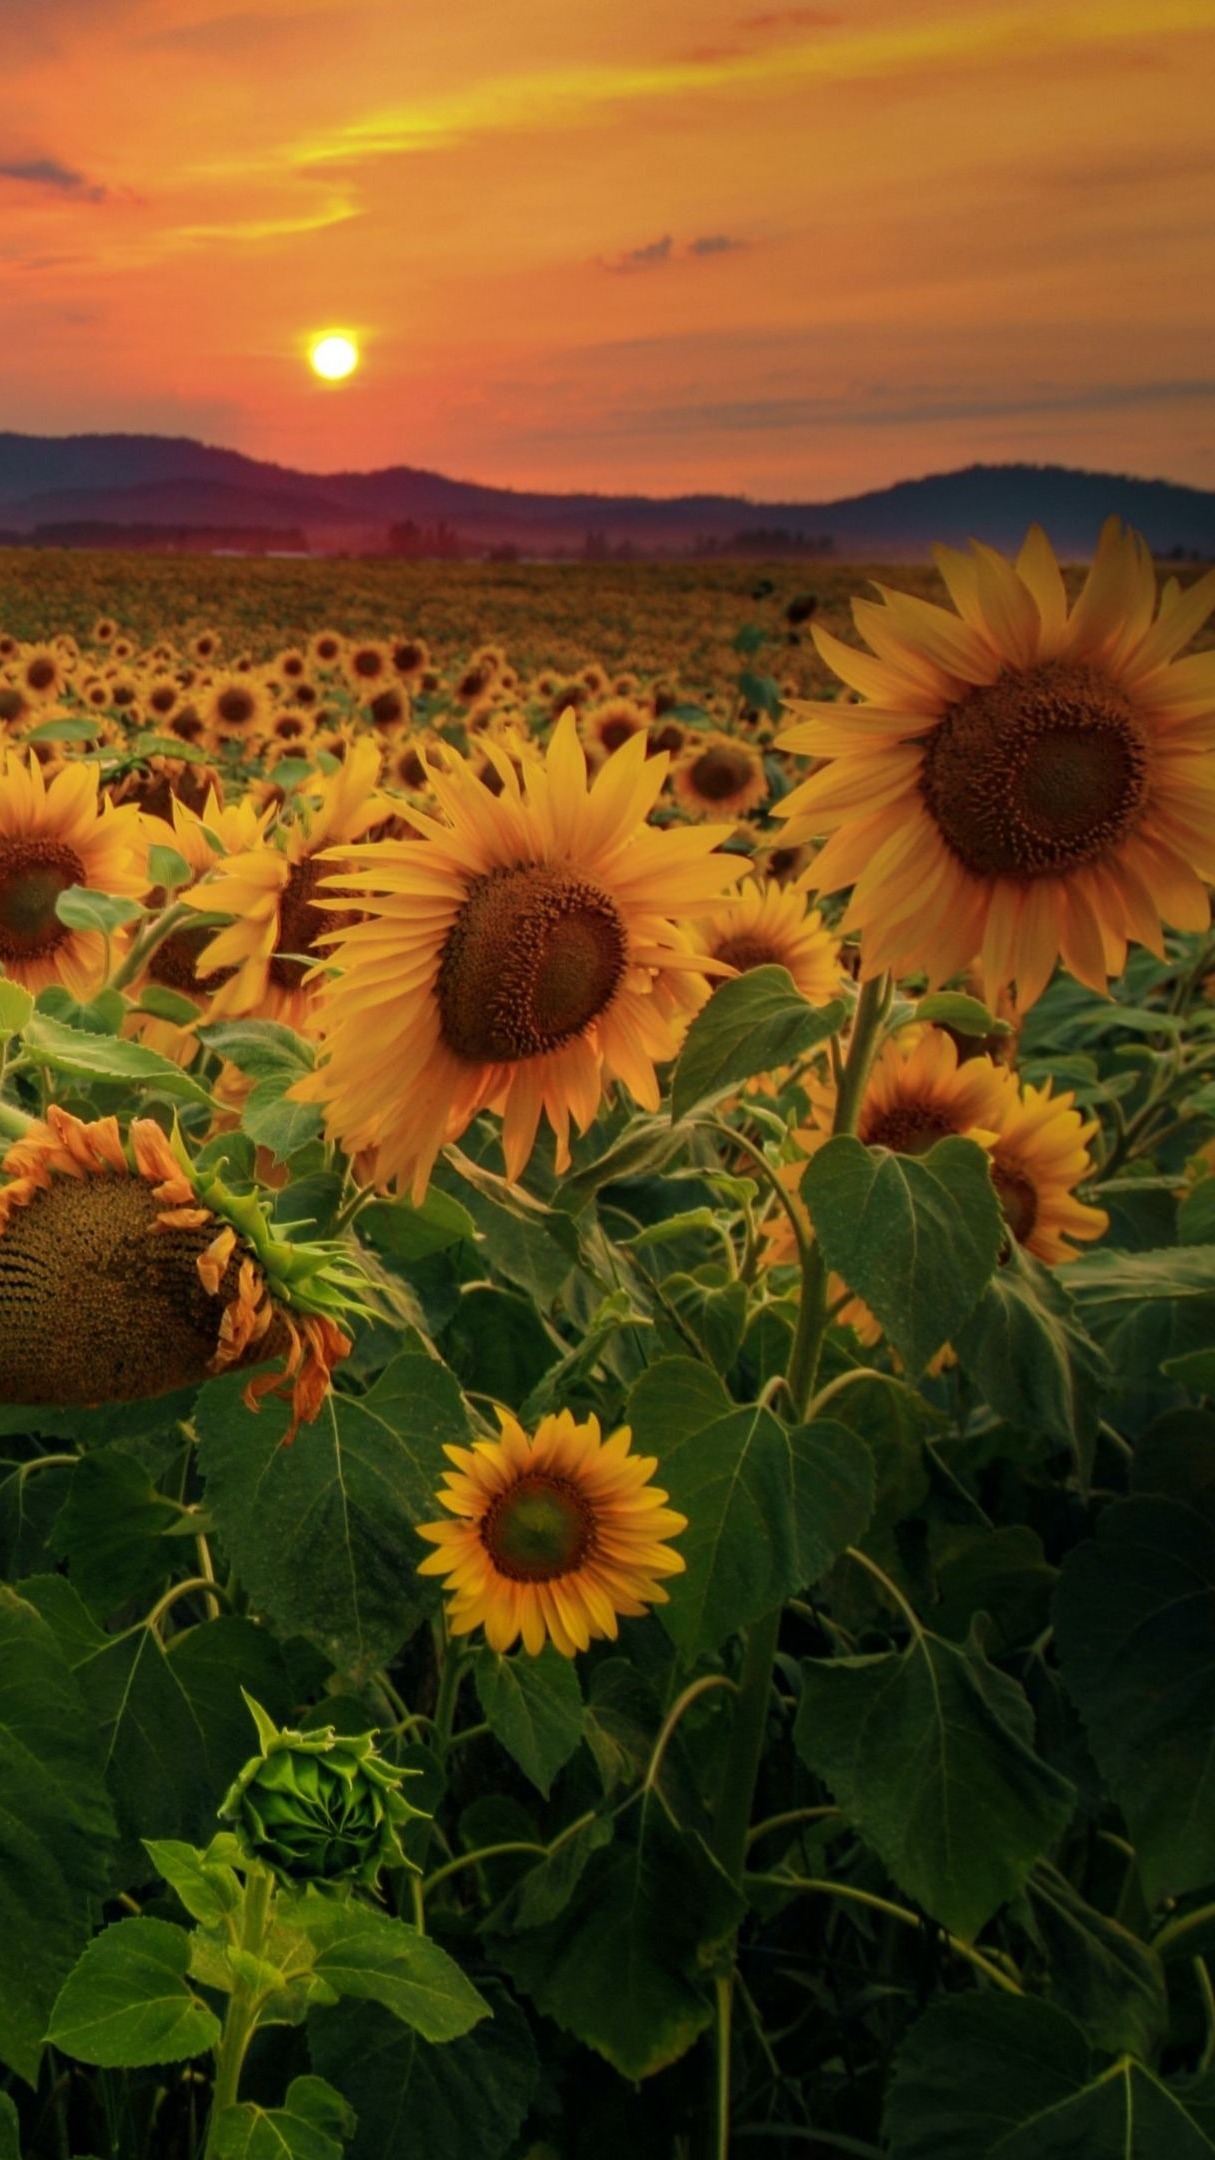 Sunflower Field In The Sunset Wallpaper Backiee